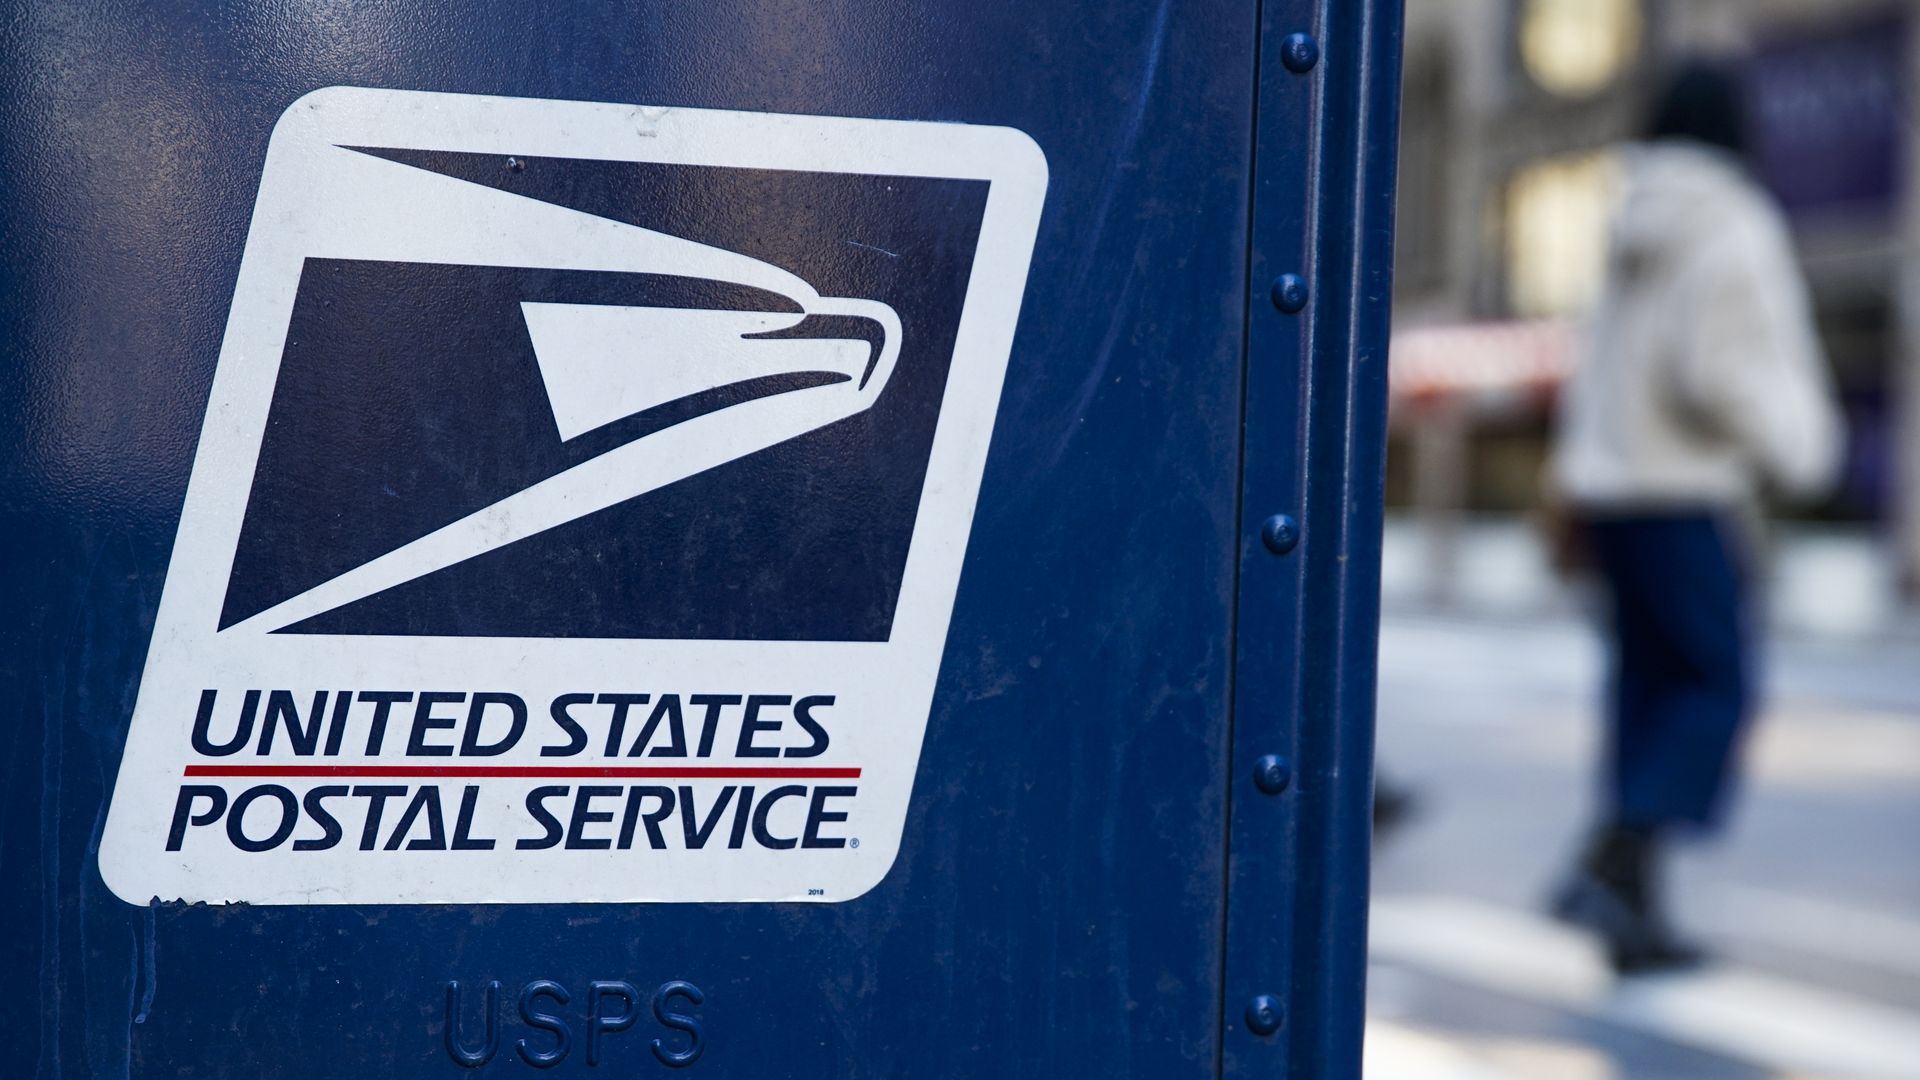 A mailbox, with focus on the United States Postal Service logo